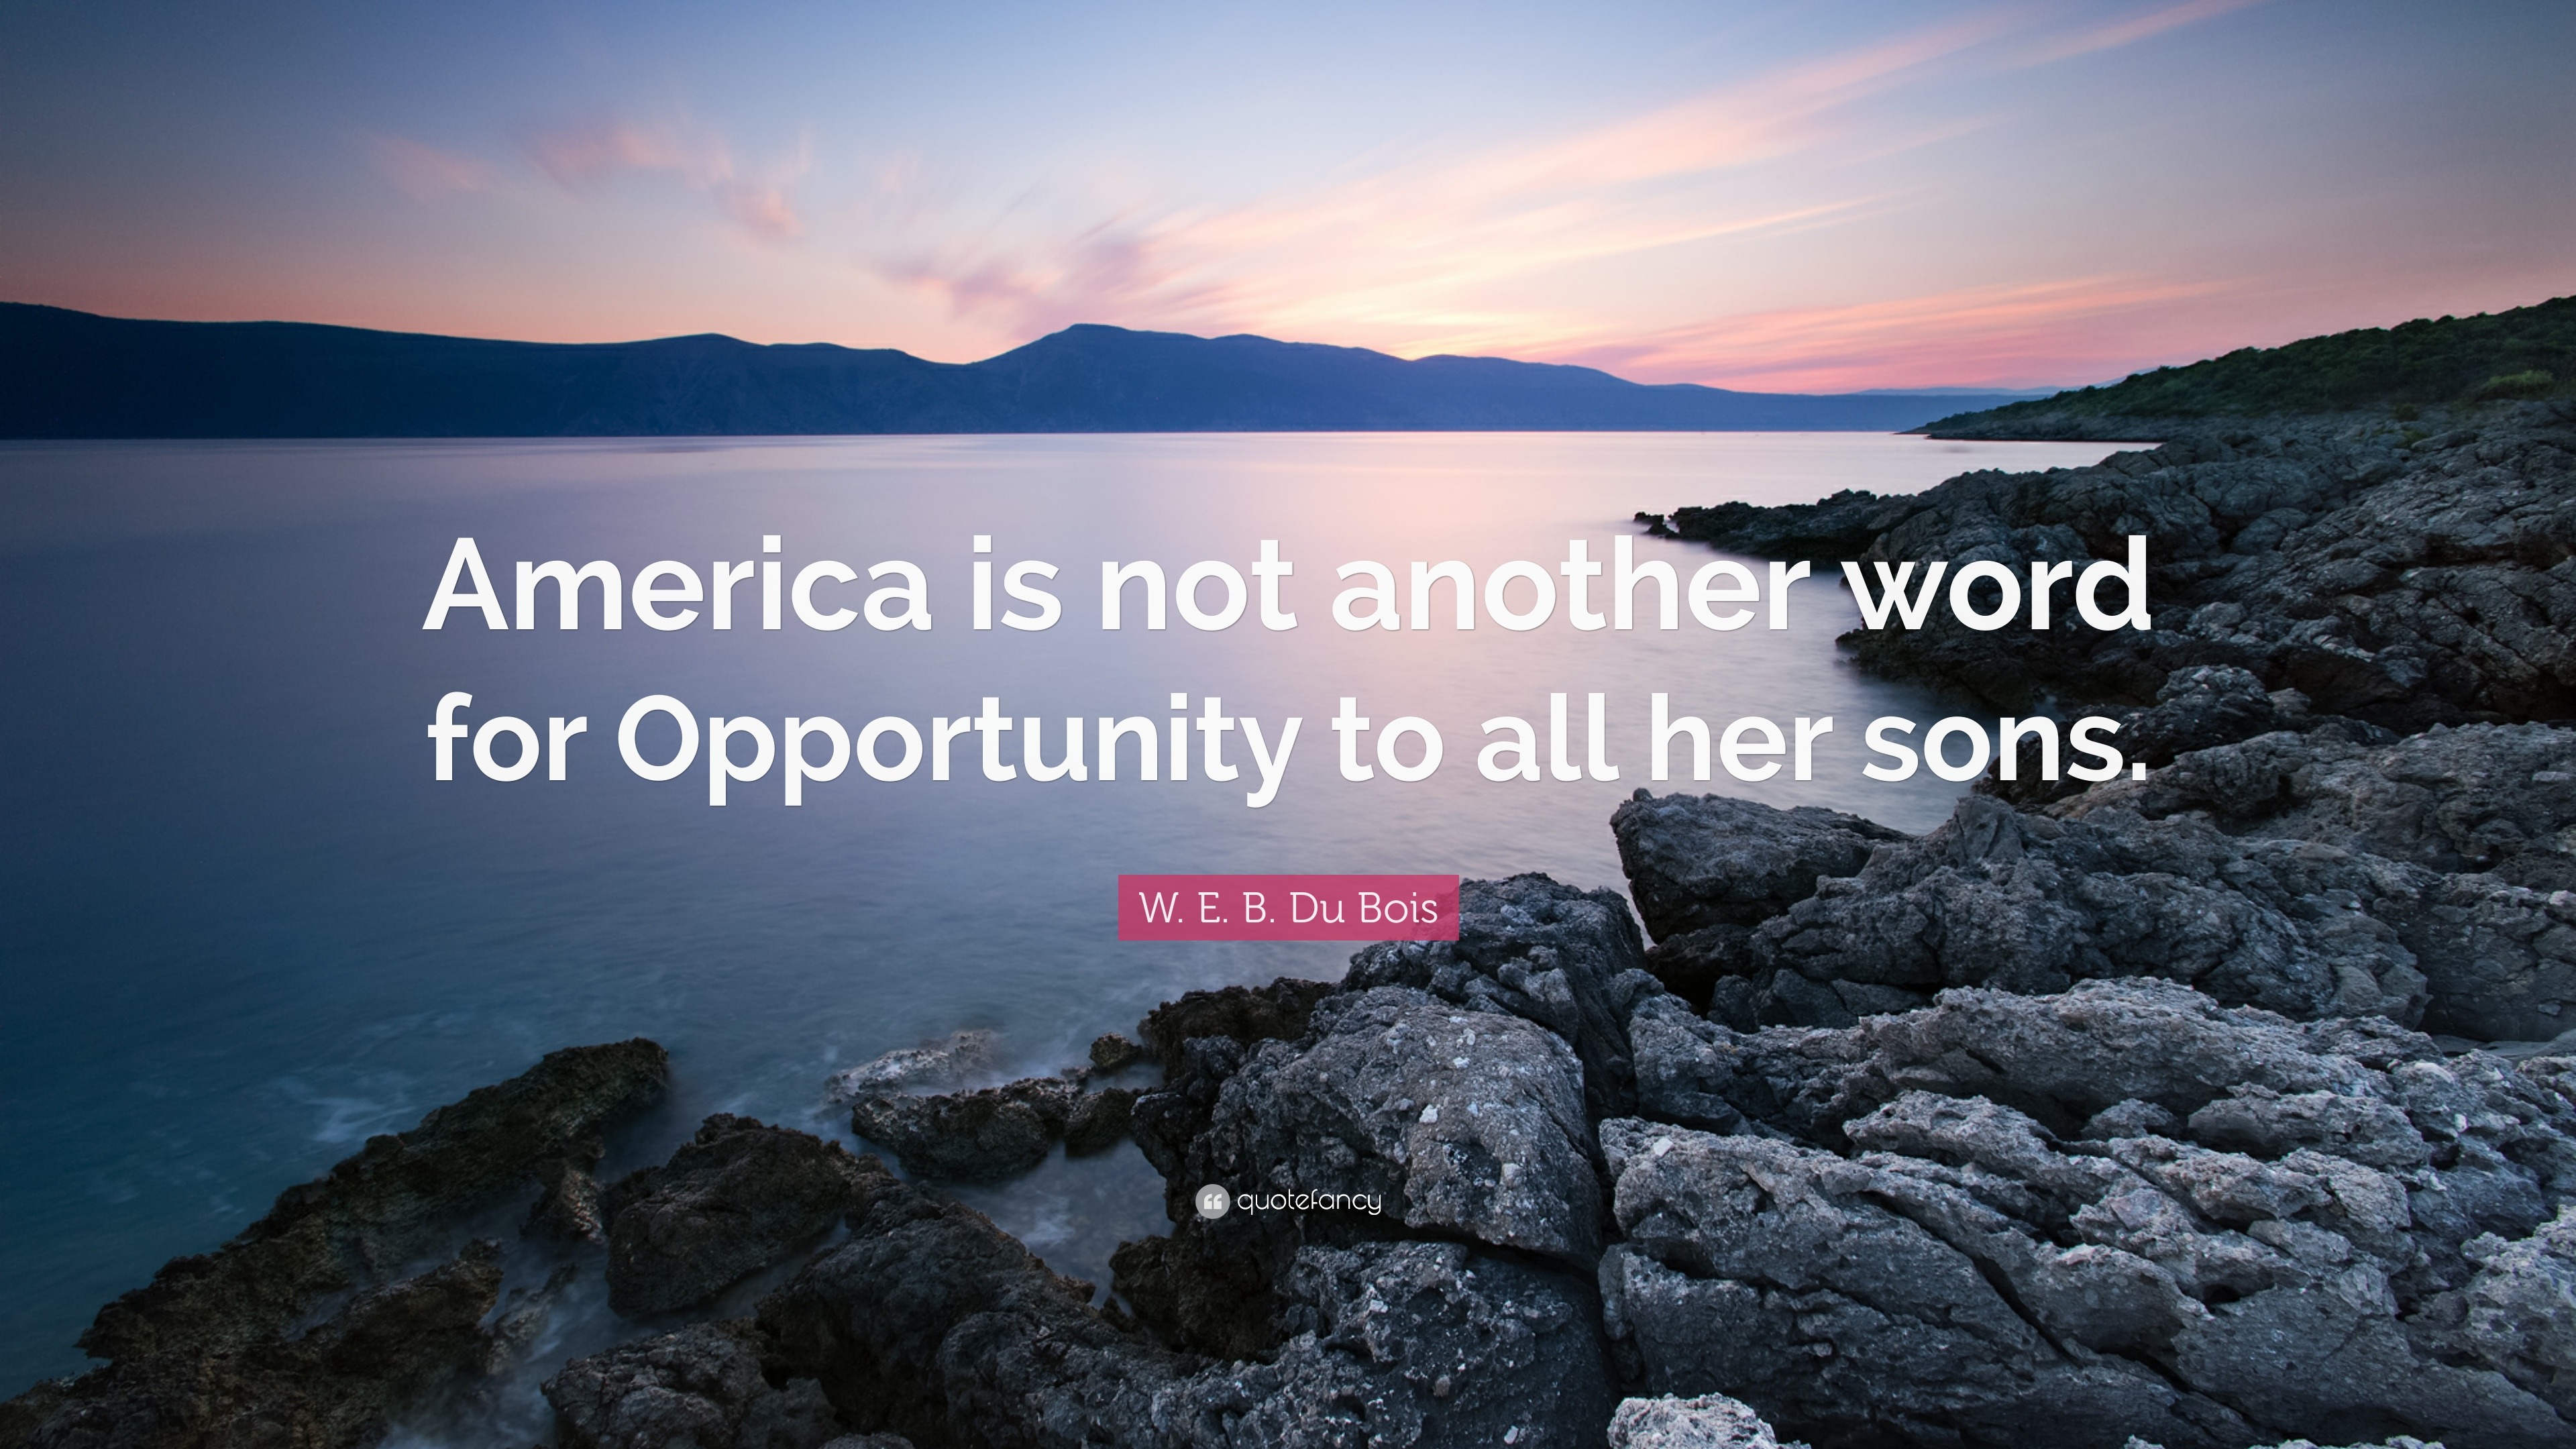 W E B Du Bois Quote America Is Not Another Word For Opportunity To All Her Sons